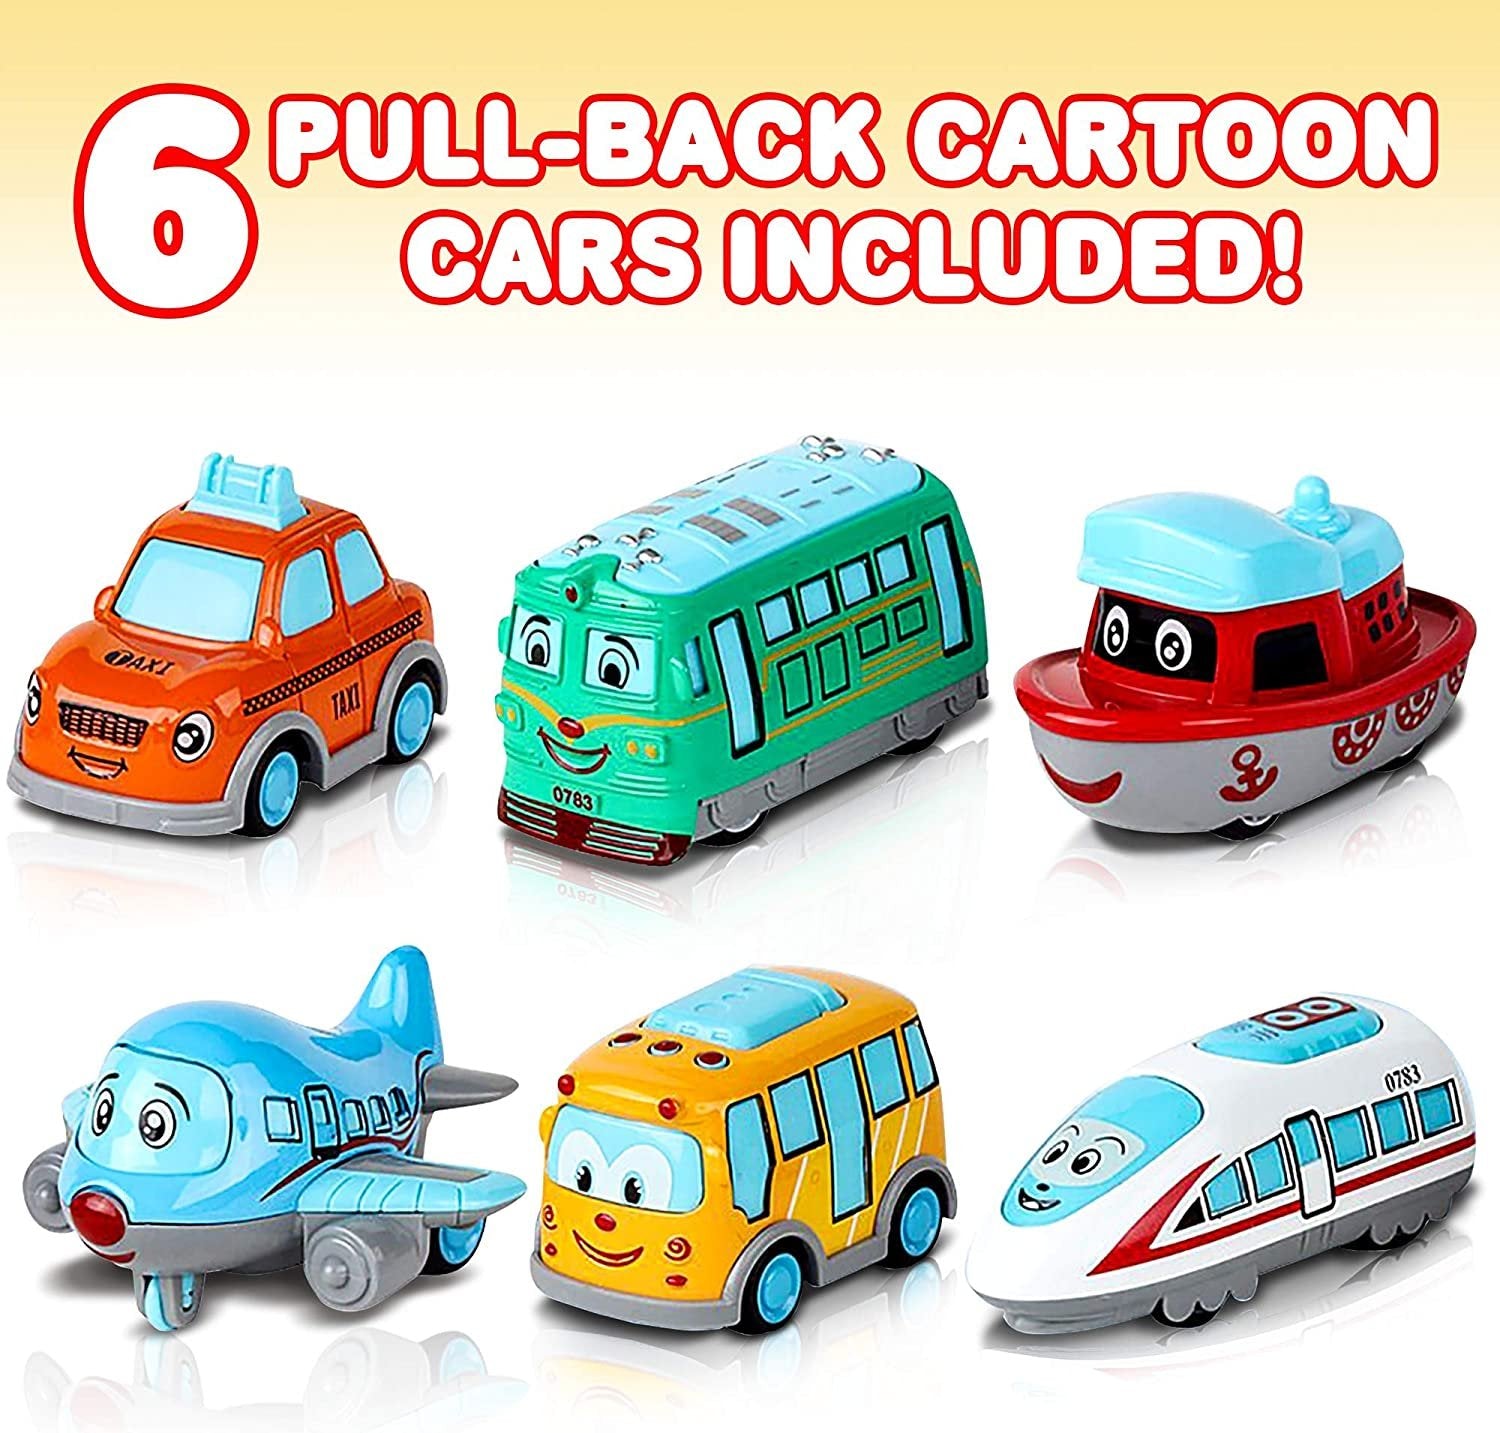 Metal Cartoon Car Set - Set of 6 Mini Pullback Toy Cars - Pullback Train, Bus, Taxi, Tram, Plane and Ship - Party Favors, Best Birthday Gift for Boys, Girls, Toddlers